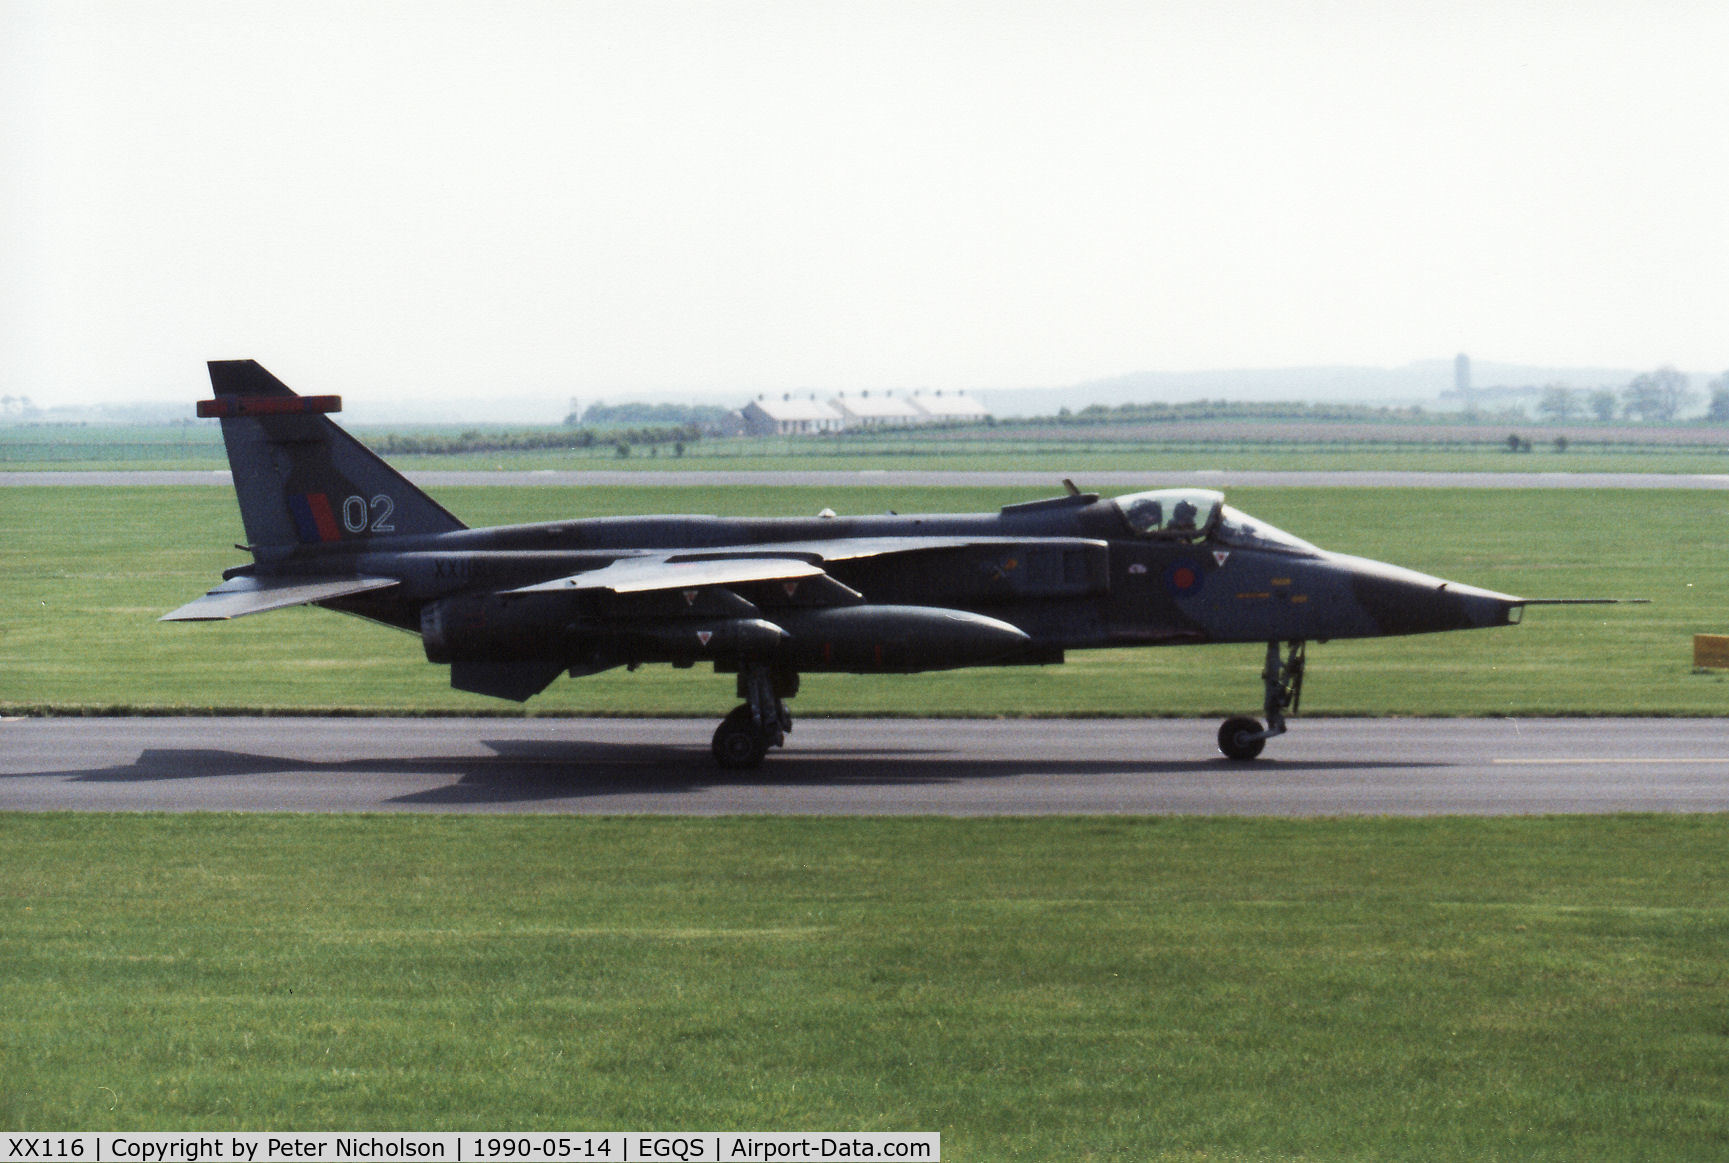 XX116, 1973 Sepecat Jaguar GR.1A C/N S.9, Jaguar GR.1A of 226 Operational Conversion Unit taxying to the active runway at RAF Lossiemouth in May 1990.